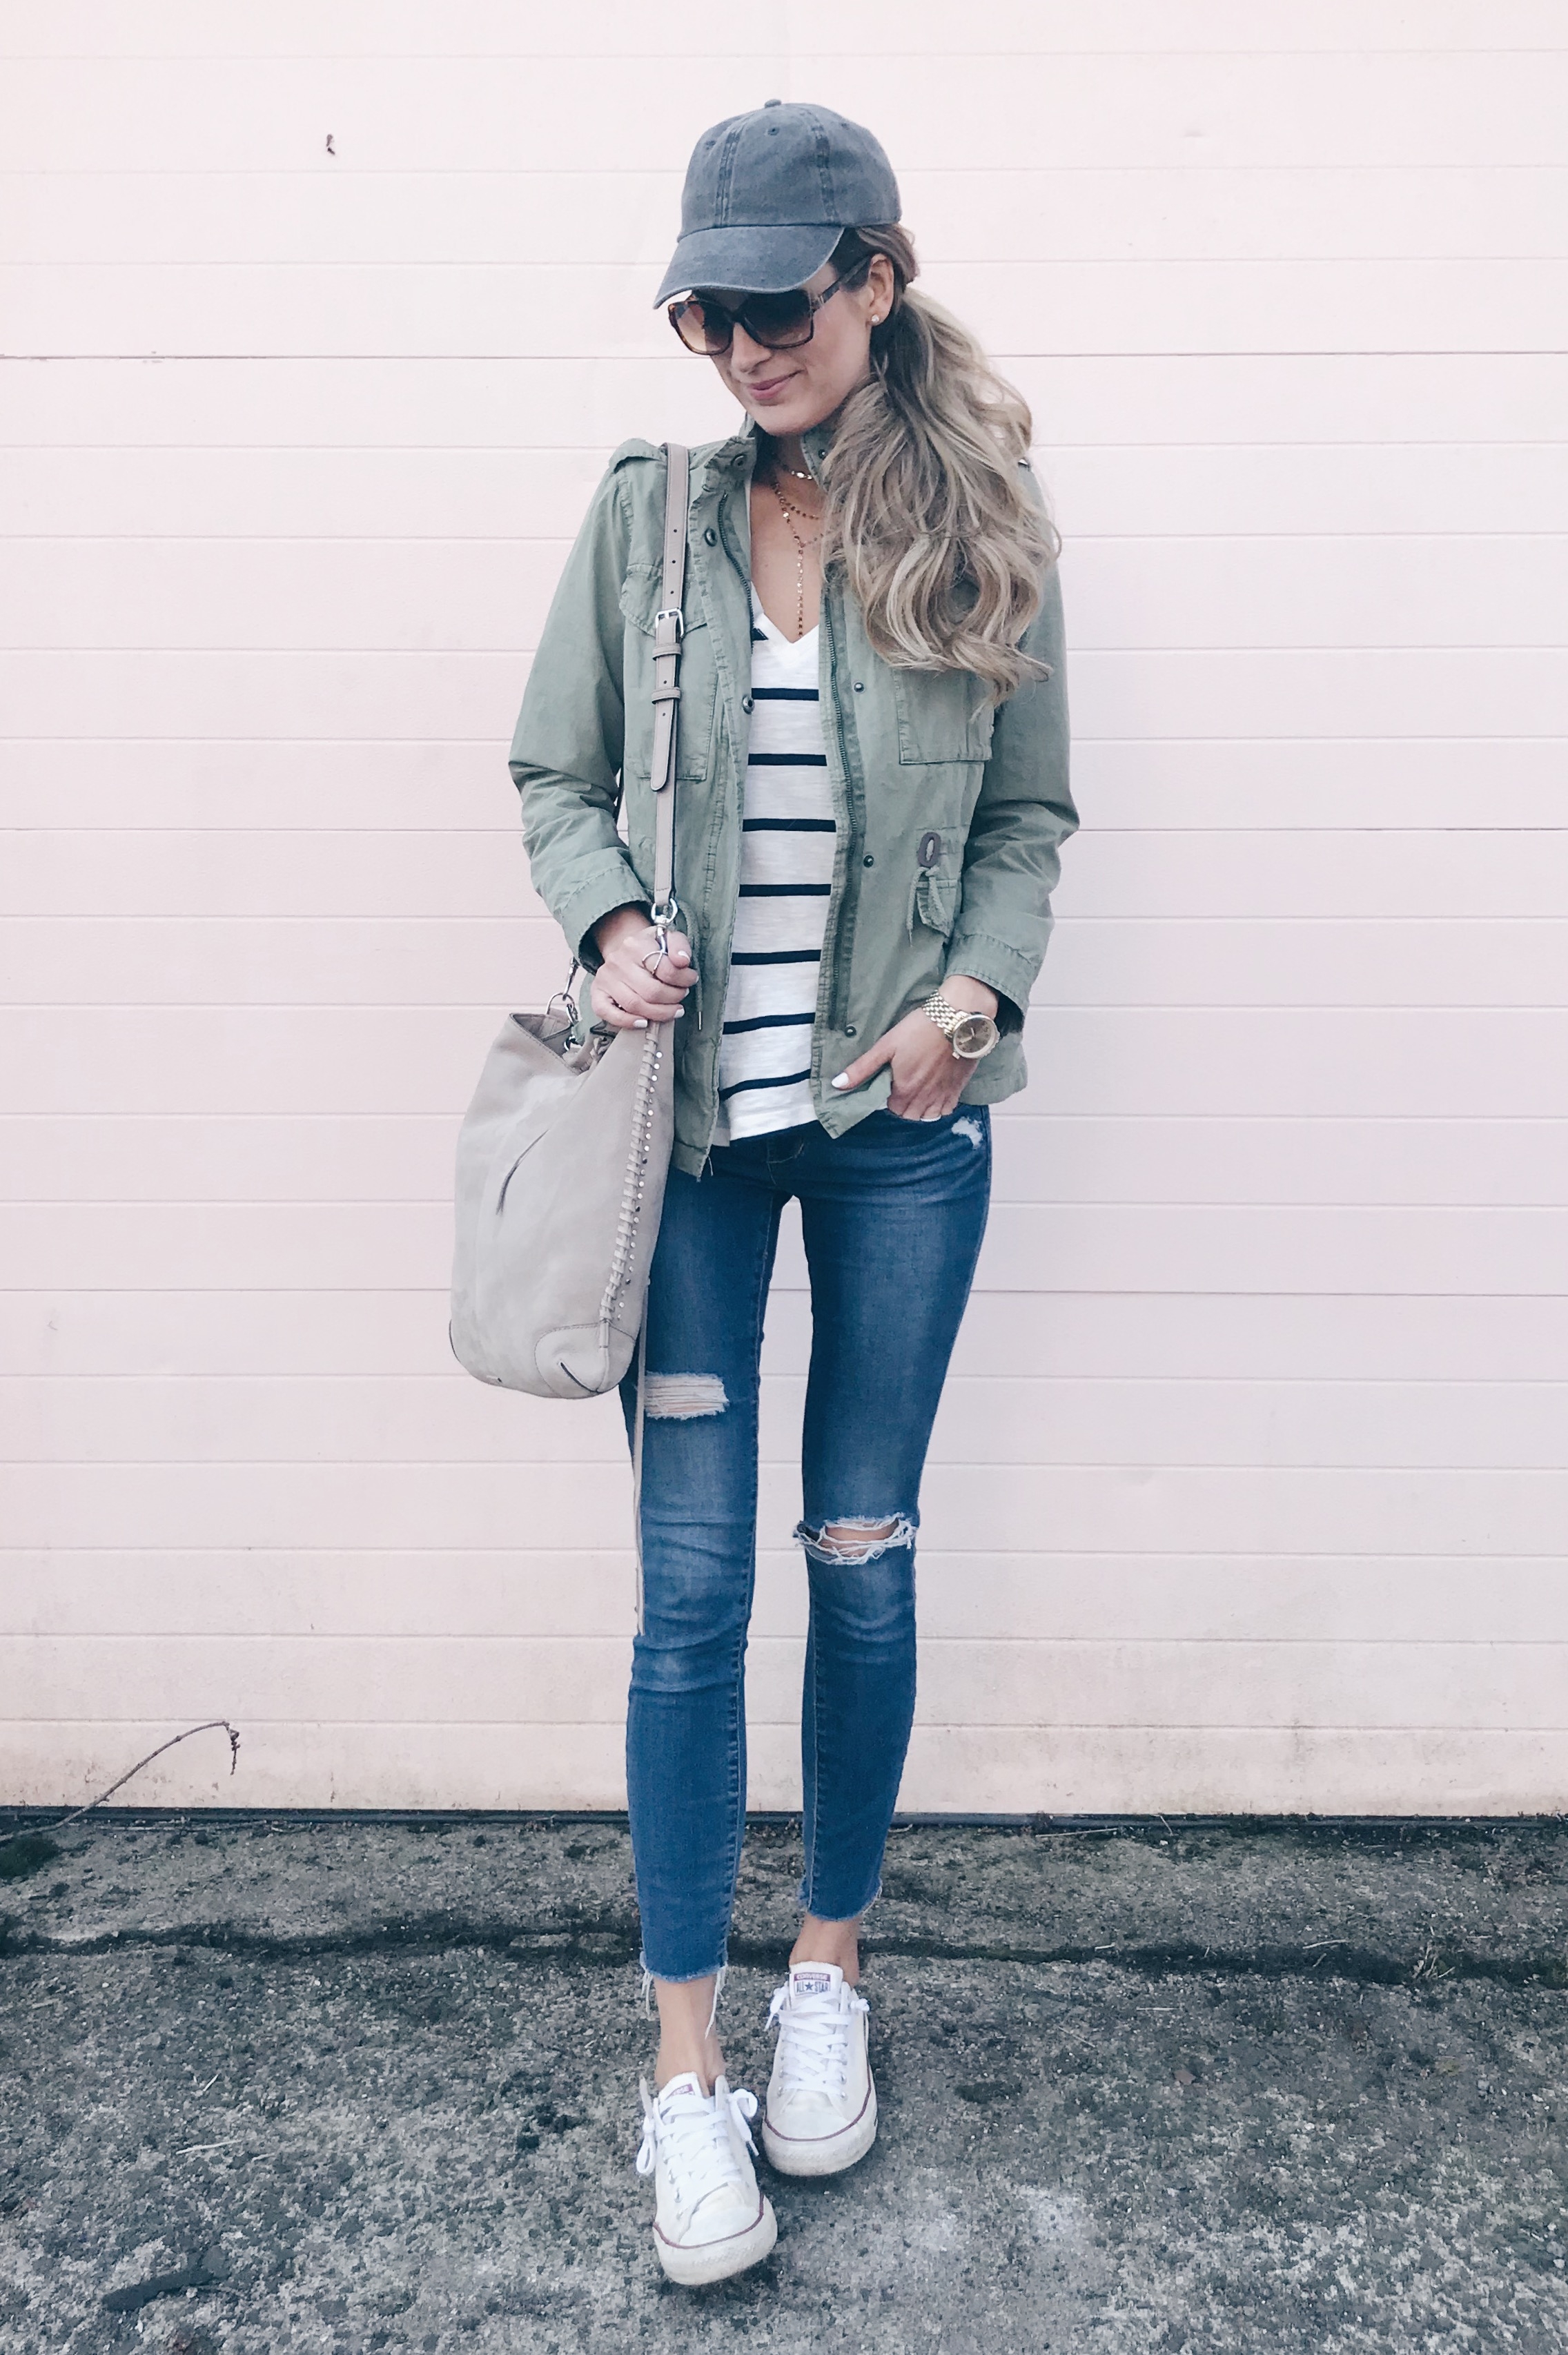 spring capsule wardrobe 2018 -skinny jeans spring outfit with utility jacket and converse sneakers on pinteresting plans fashion blog 